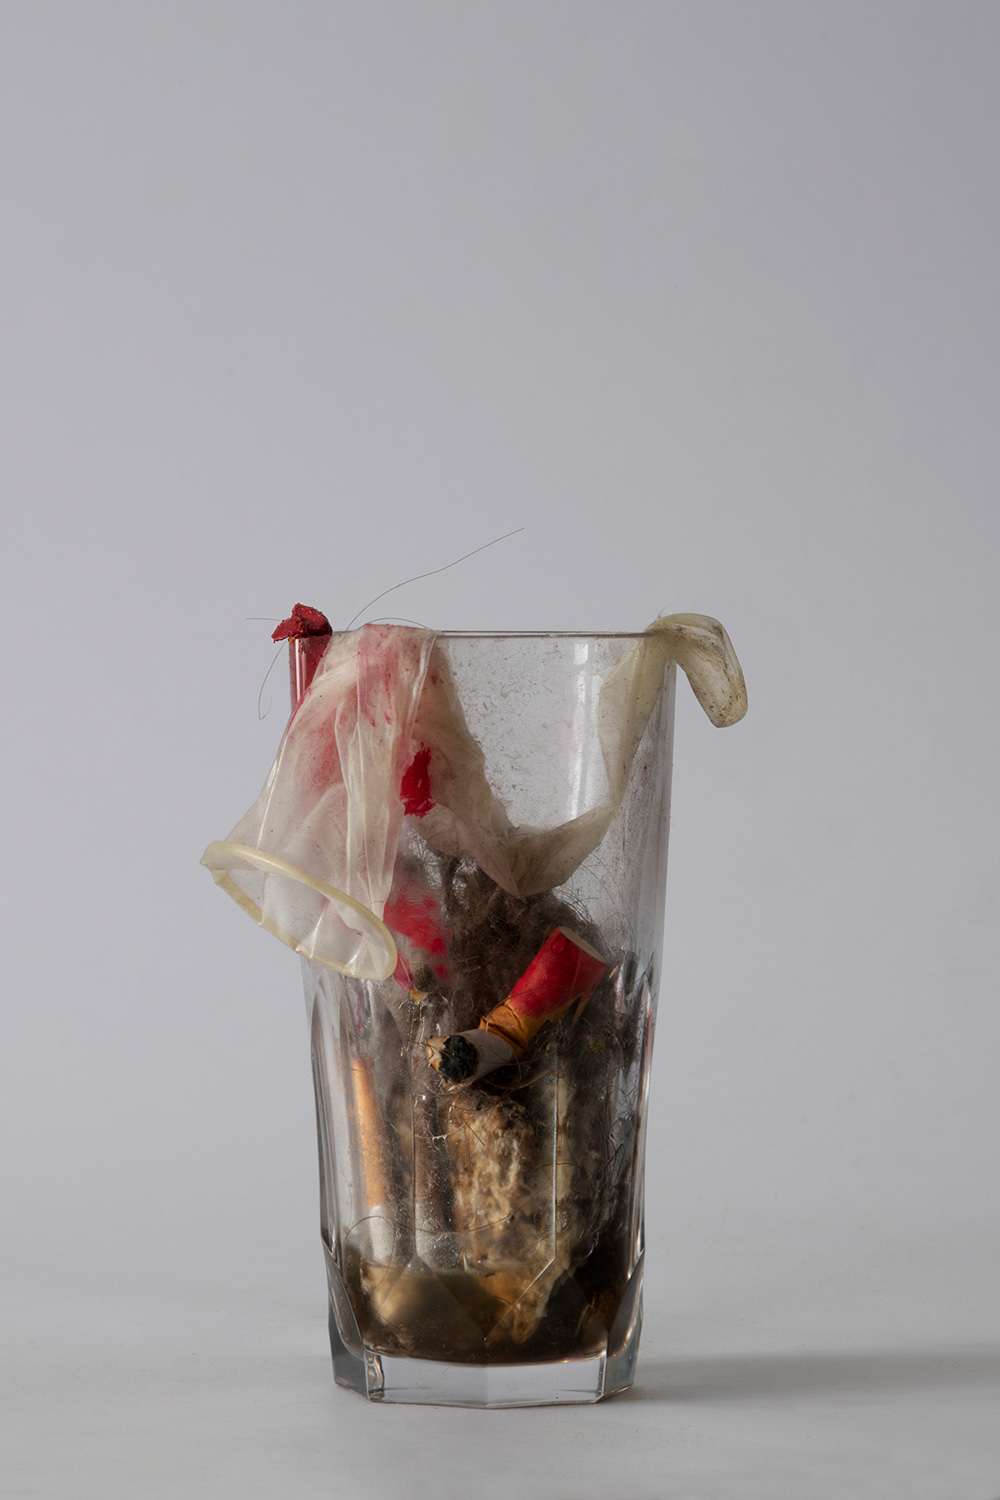 Glass full of cigs butts, condom, lipstick and dust on grey background